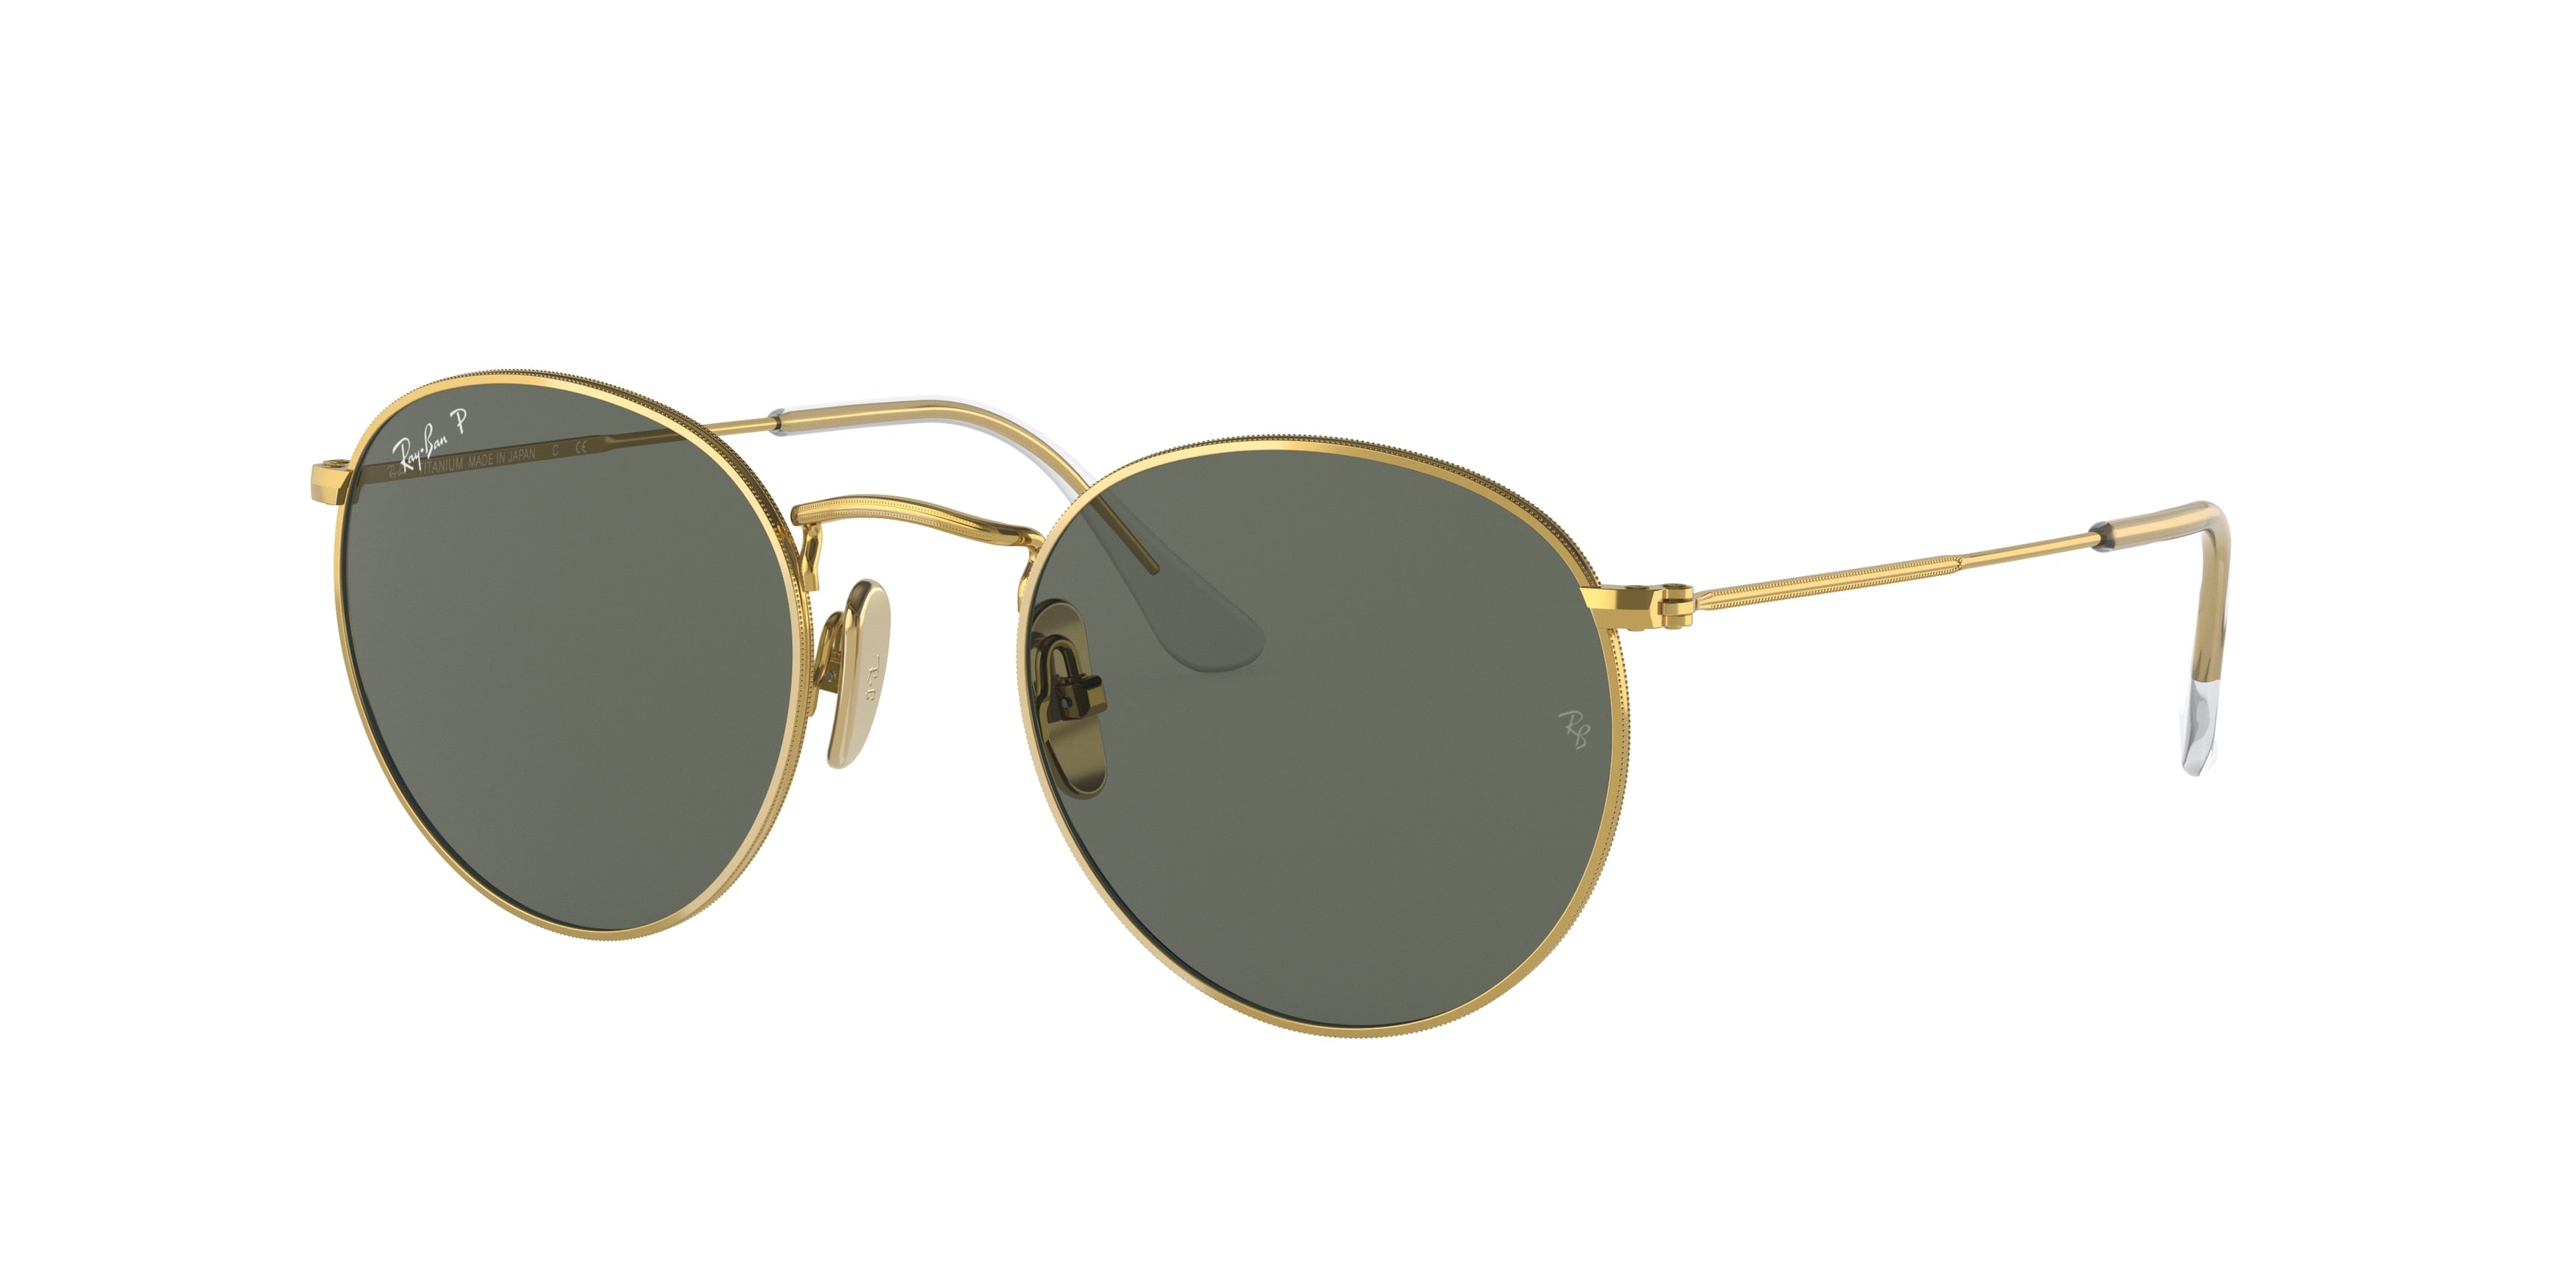 Ray-Ban ROUND RB8247 Phantos Sunglasses  921658-Gold 50-145-21 - Color Map Gold